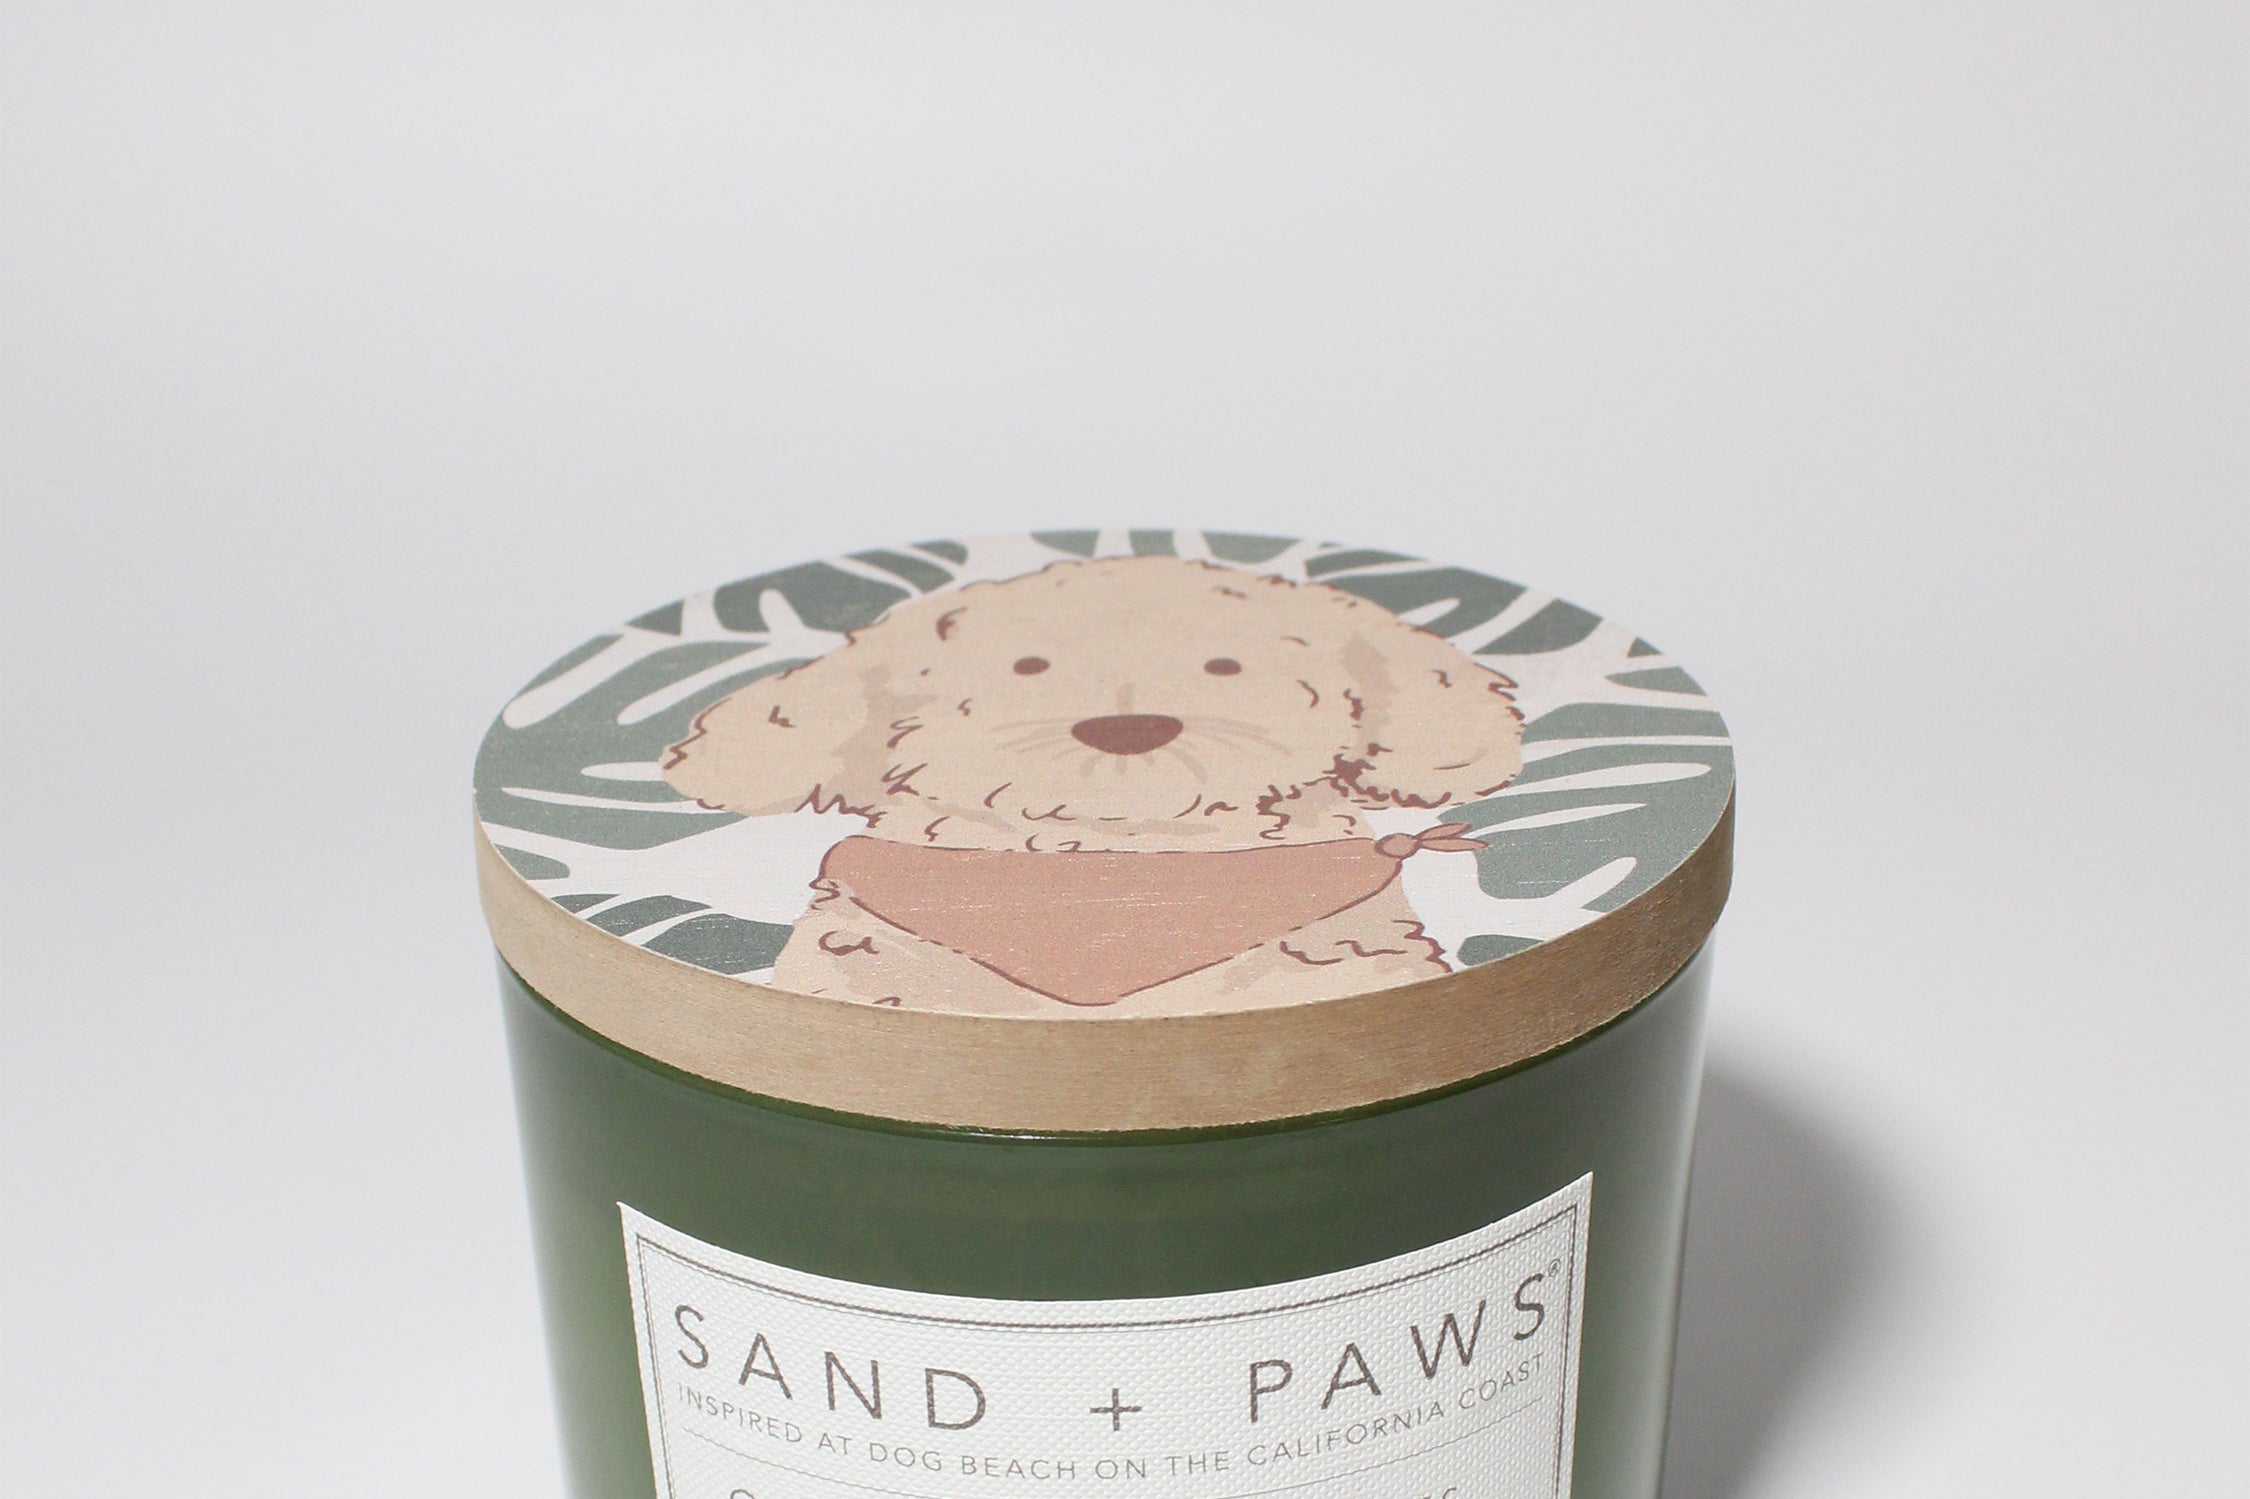 Sand + Paws Clean Waves 12 oz scented candle Kale vessel with Golden Doodle painted lid